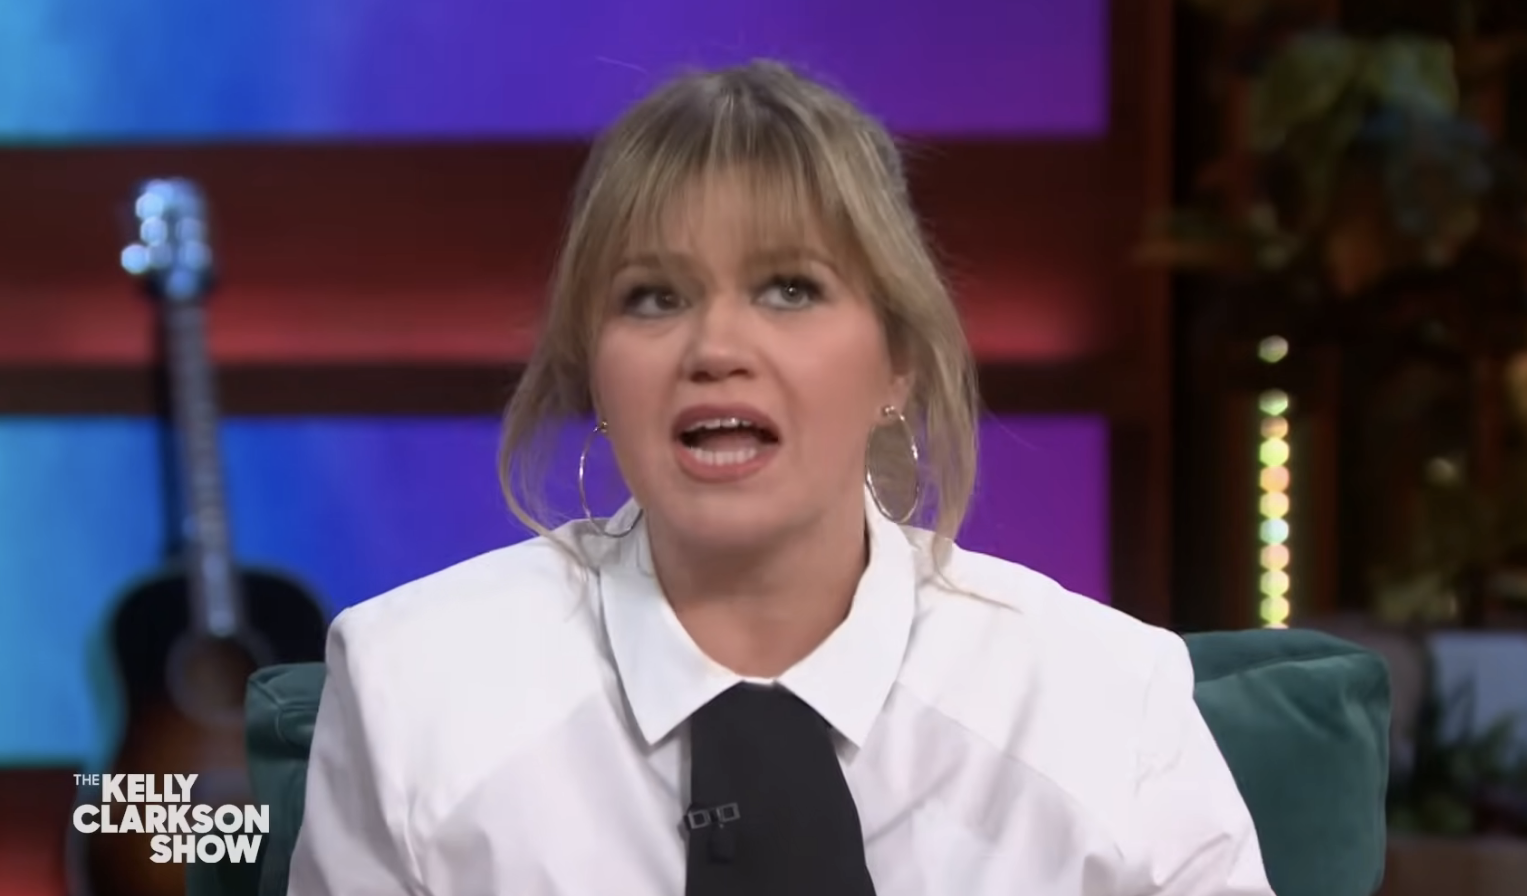 Kelly Clarkson Personal Hygiene Comments Go Viral